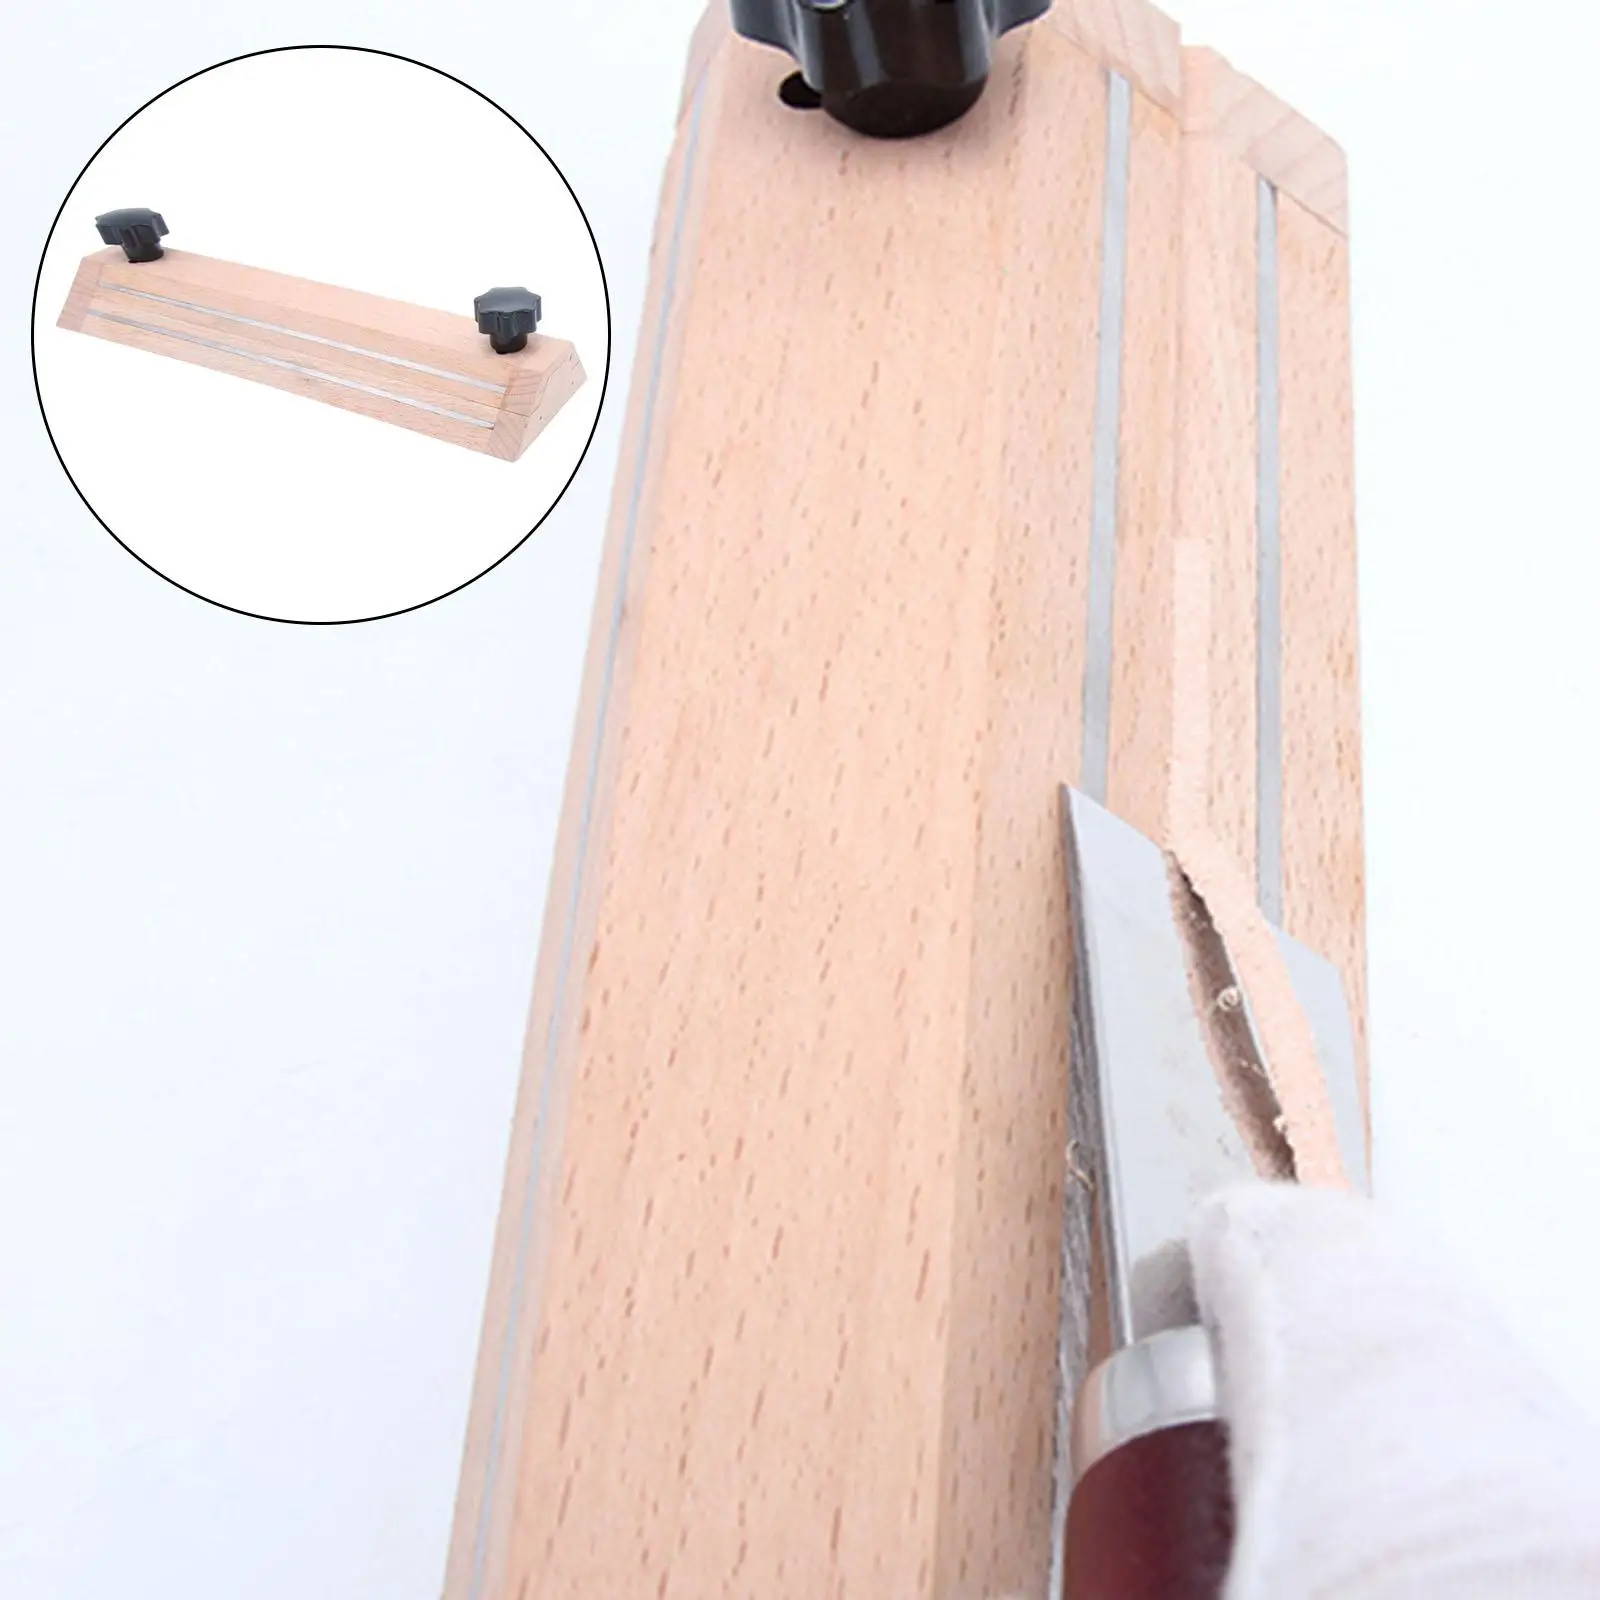 Leather Strap Tool Upgraded Wooden Professional Strip Cutter Leather Peeling Tool Leather Repairing Splitter Skiver Peeling Tool